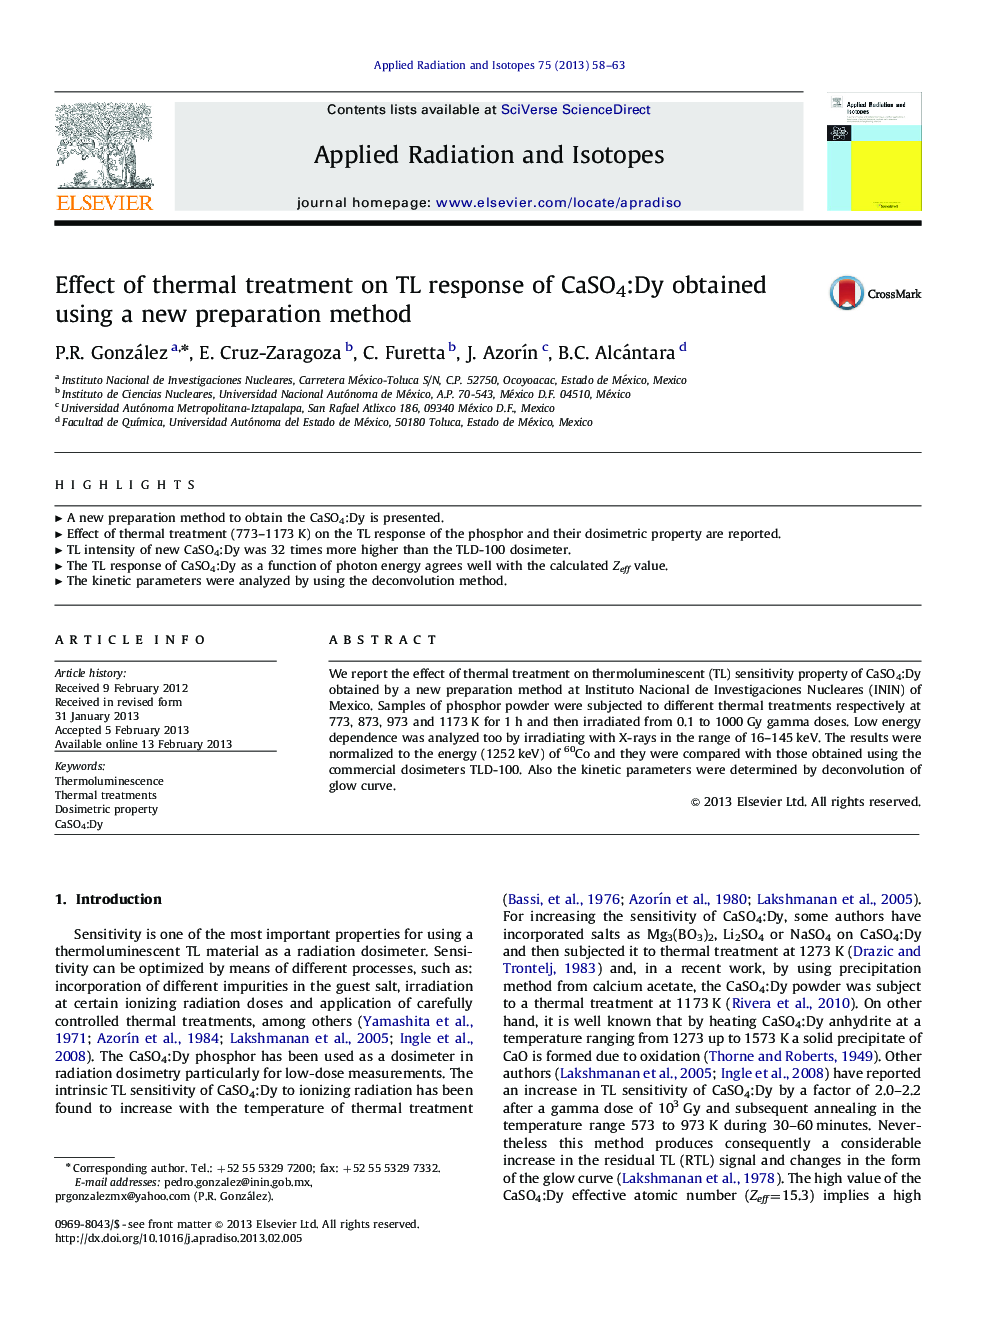 Effect of thermal treatment on TL response of CaSO4:Dy obtained using a new preparation method